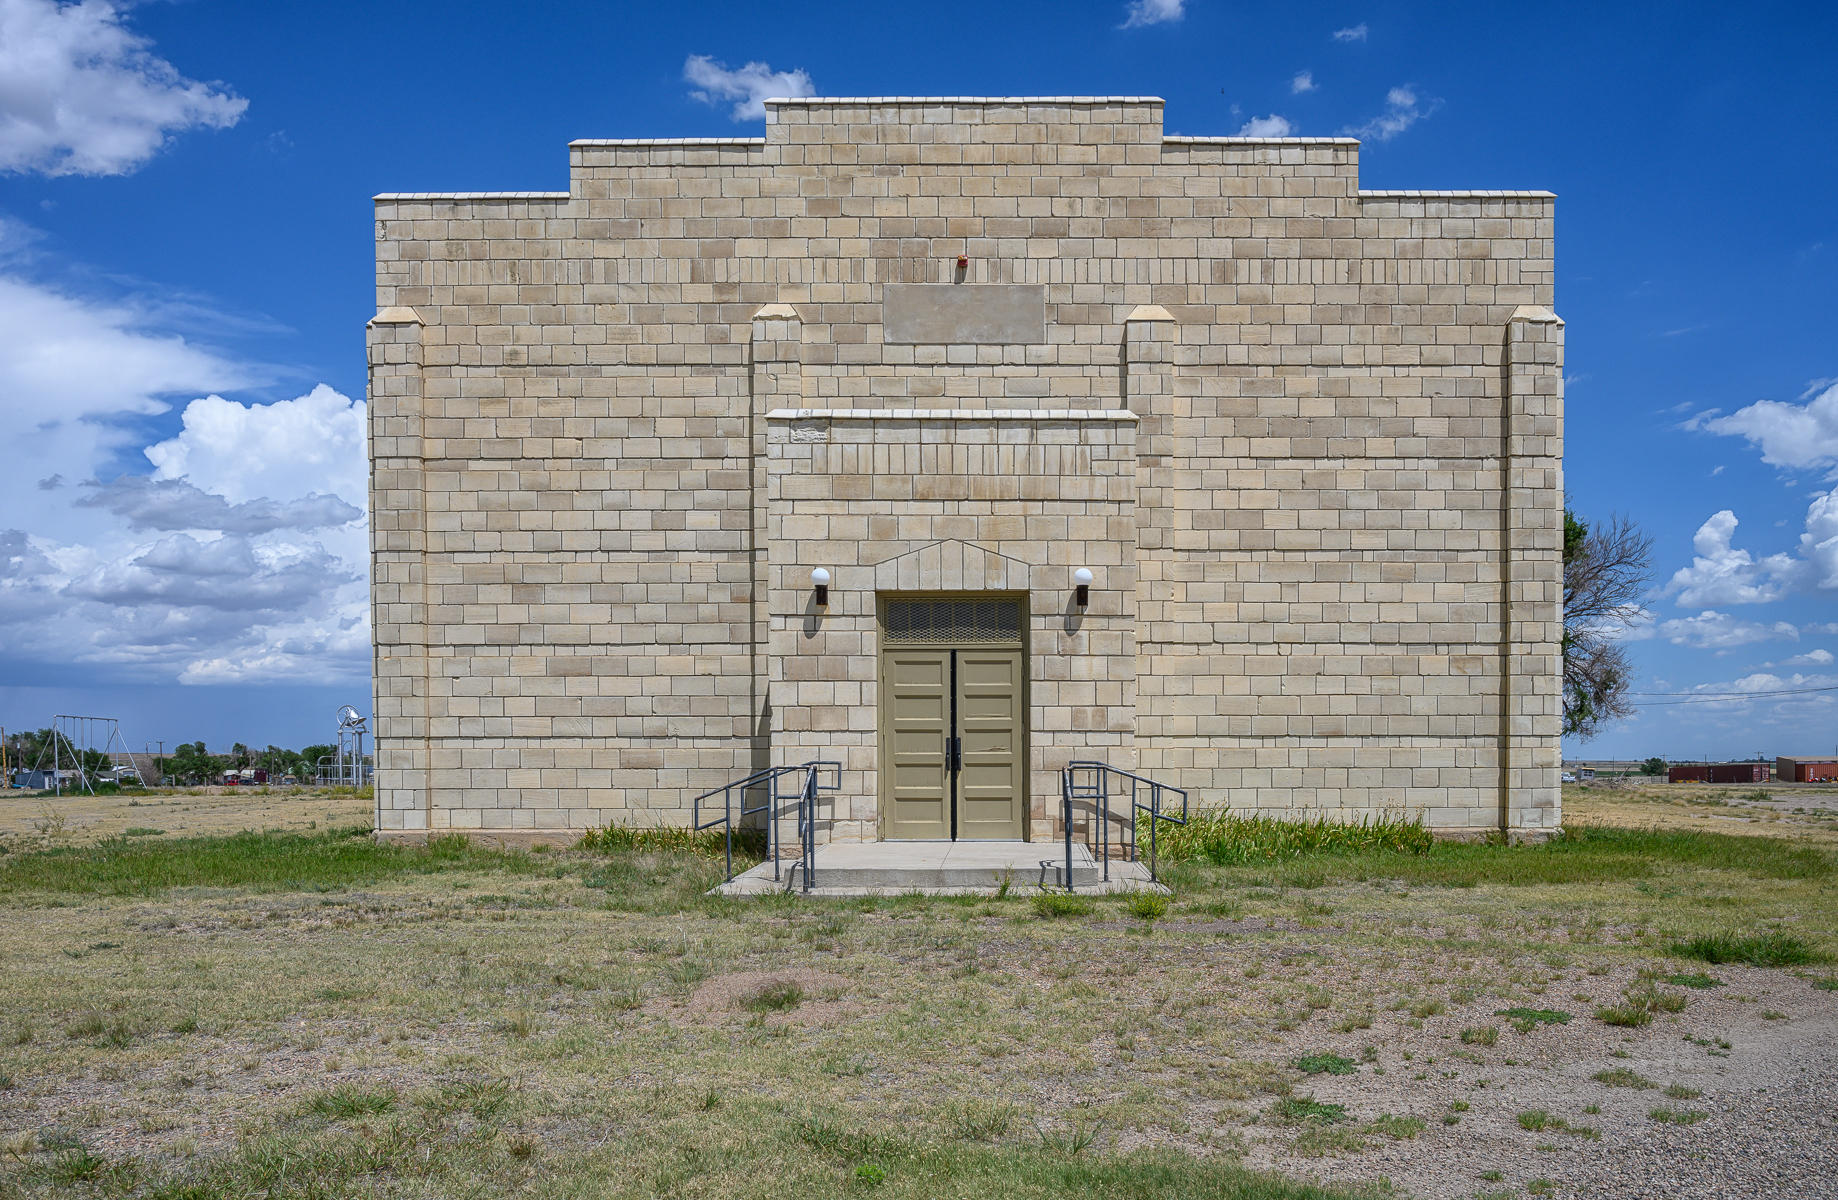 An gymnasium built in 1938 during the Roosevelt  Presidency, part of the WPA program. : Small Towns : ELIZABETH SANJUAN PHOTOGRAPHY